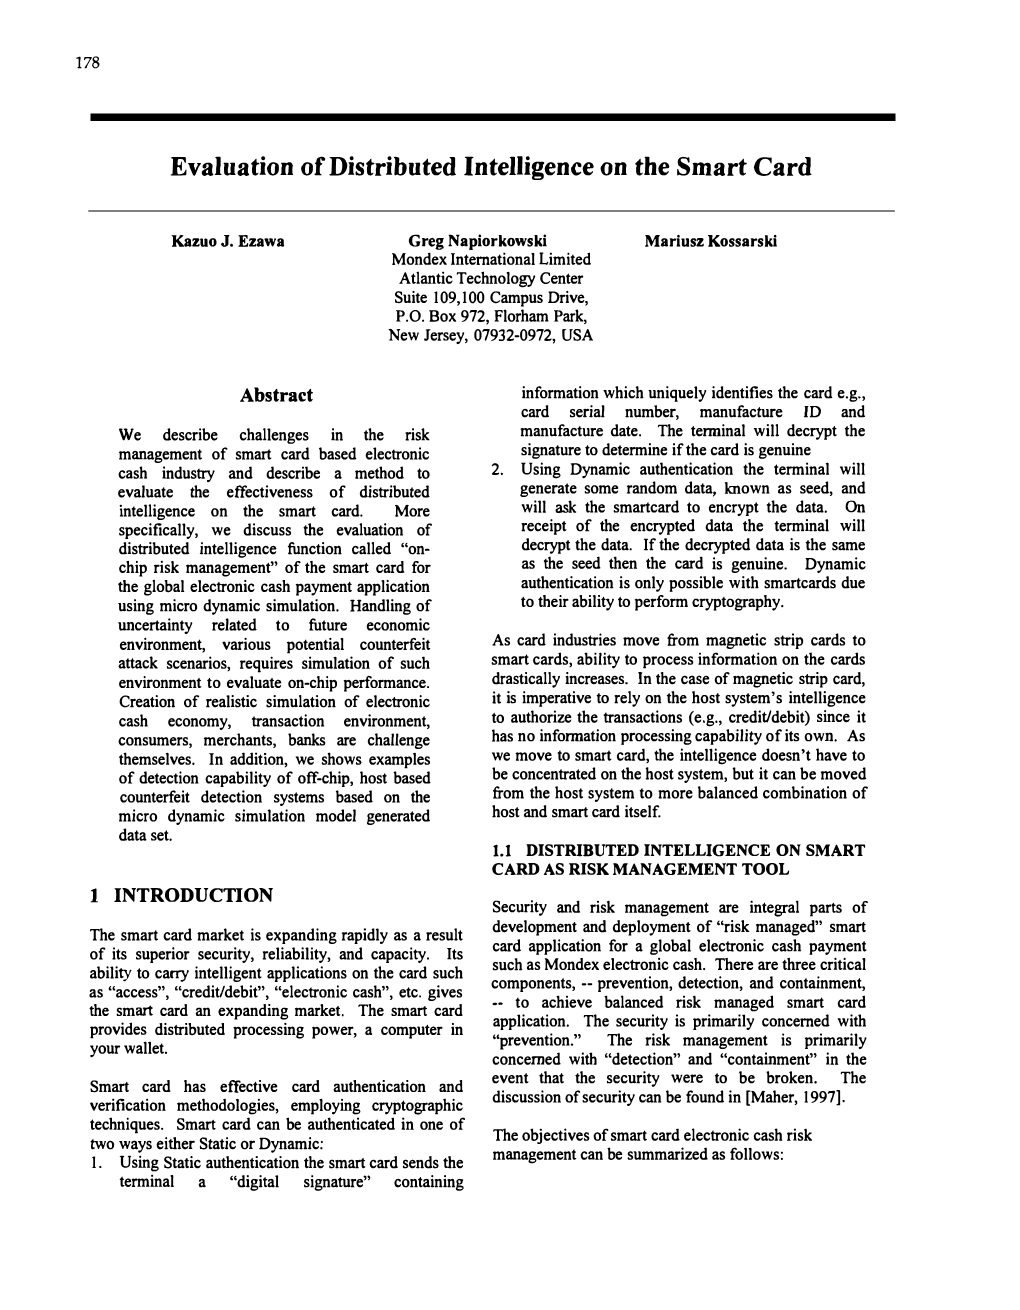 Evaluation of Distributed Intelligence on the Smart Card